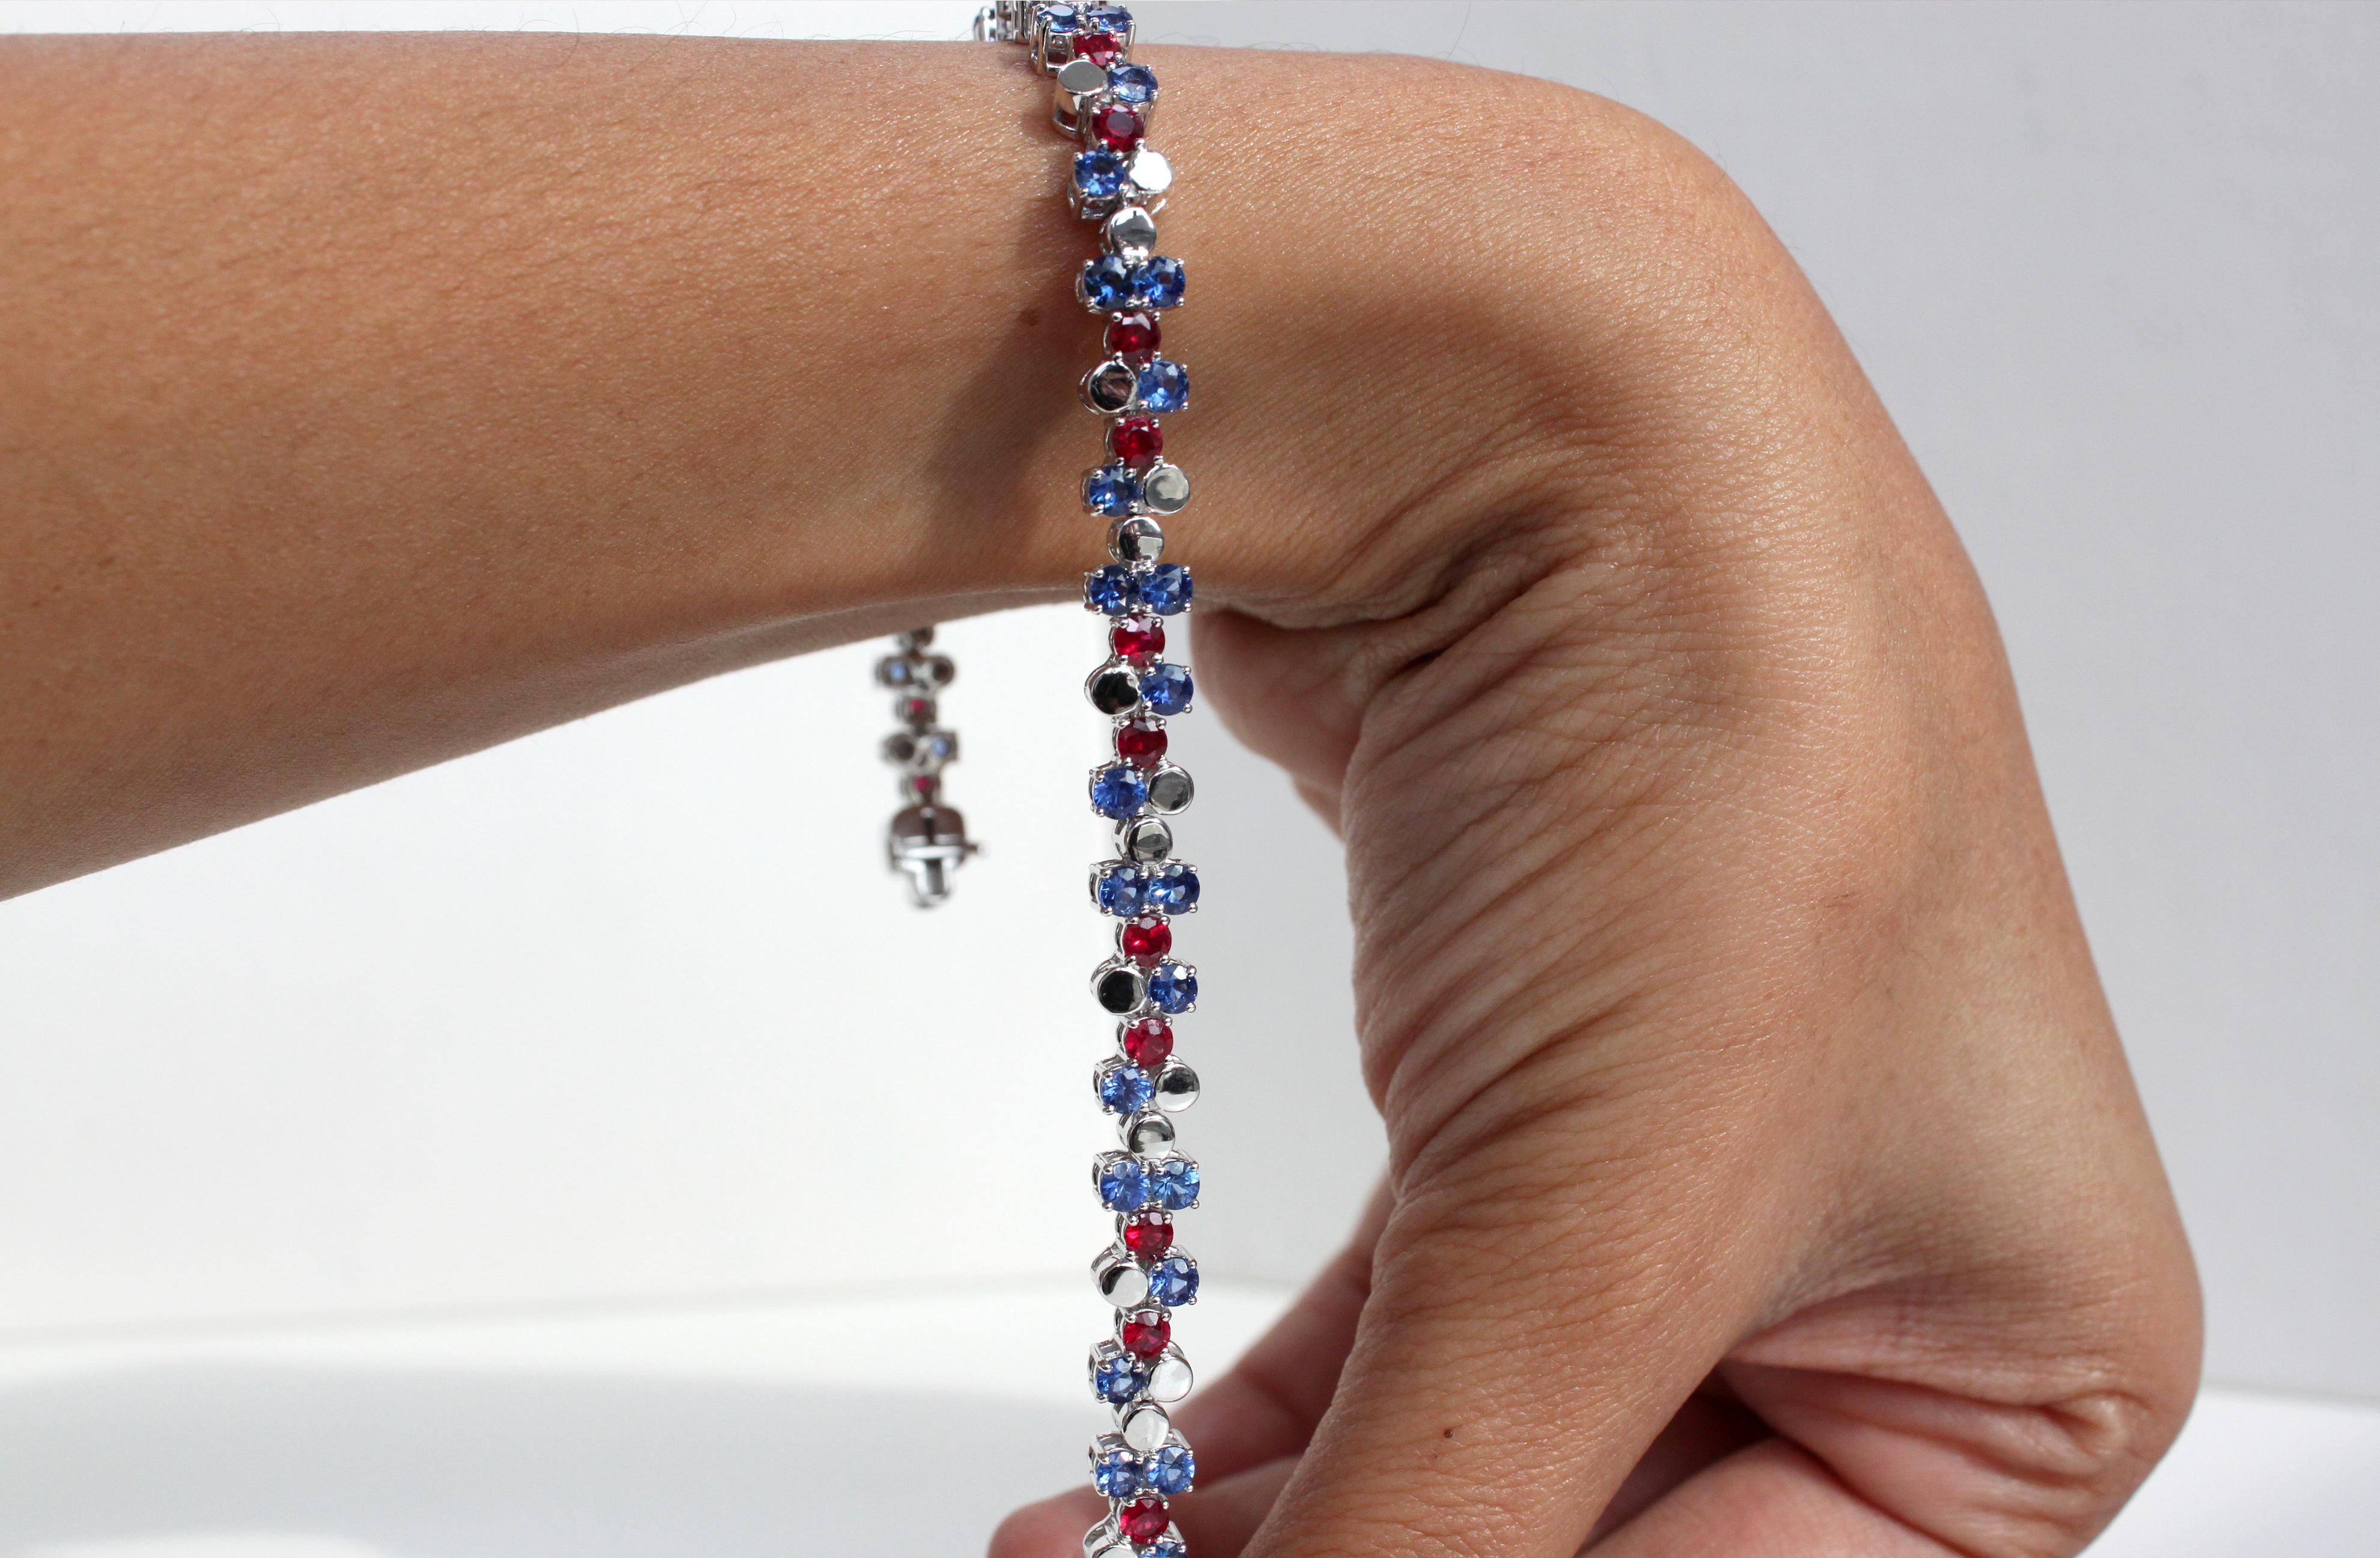 Total Weight: 18.49g
Total Gemstone Weight: 6.48ct (ruby 2.15ct  blue sapphire 4.33ct)
Bracelet Length: 18 cm
Bracelet Width: 0.6cm

Introducing our one-of-a-kind Natural Gemstone Bracelet, a true masterpiece inspired by the intricate design of a